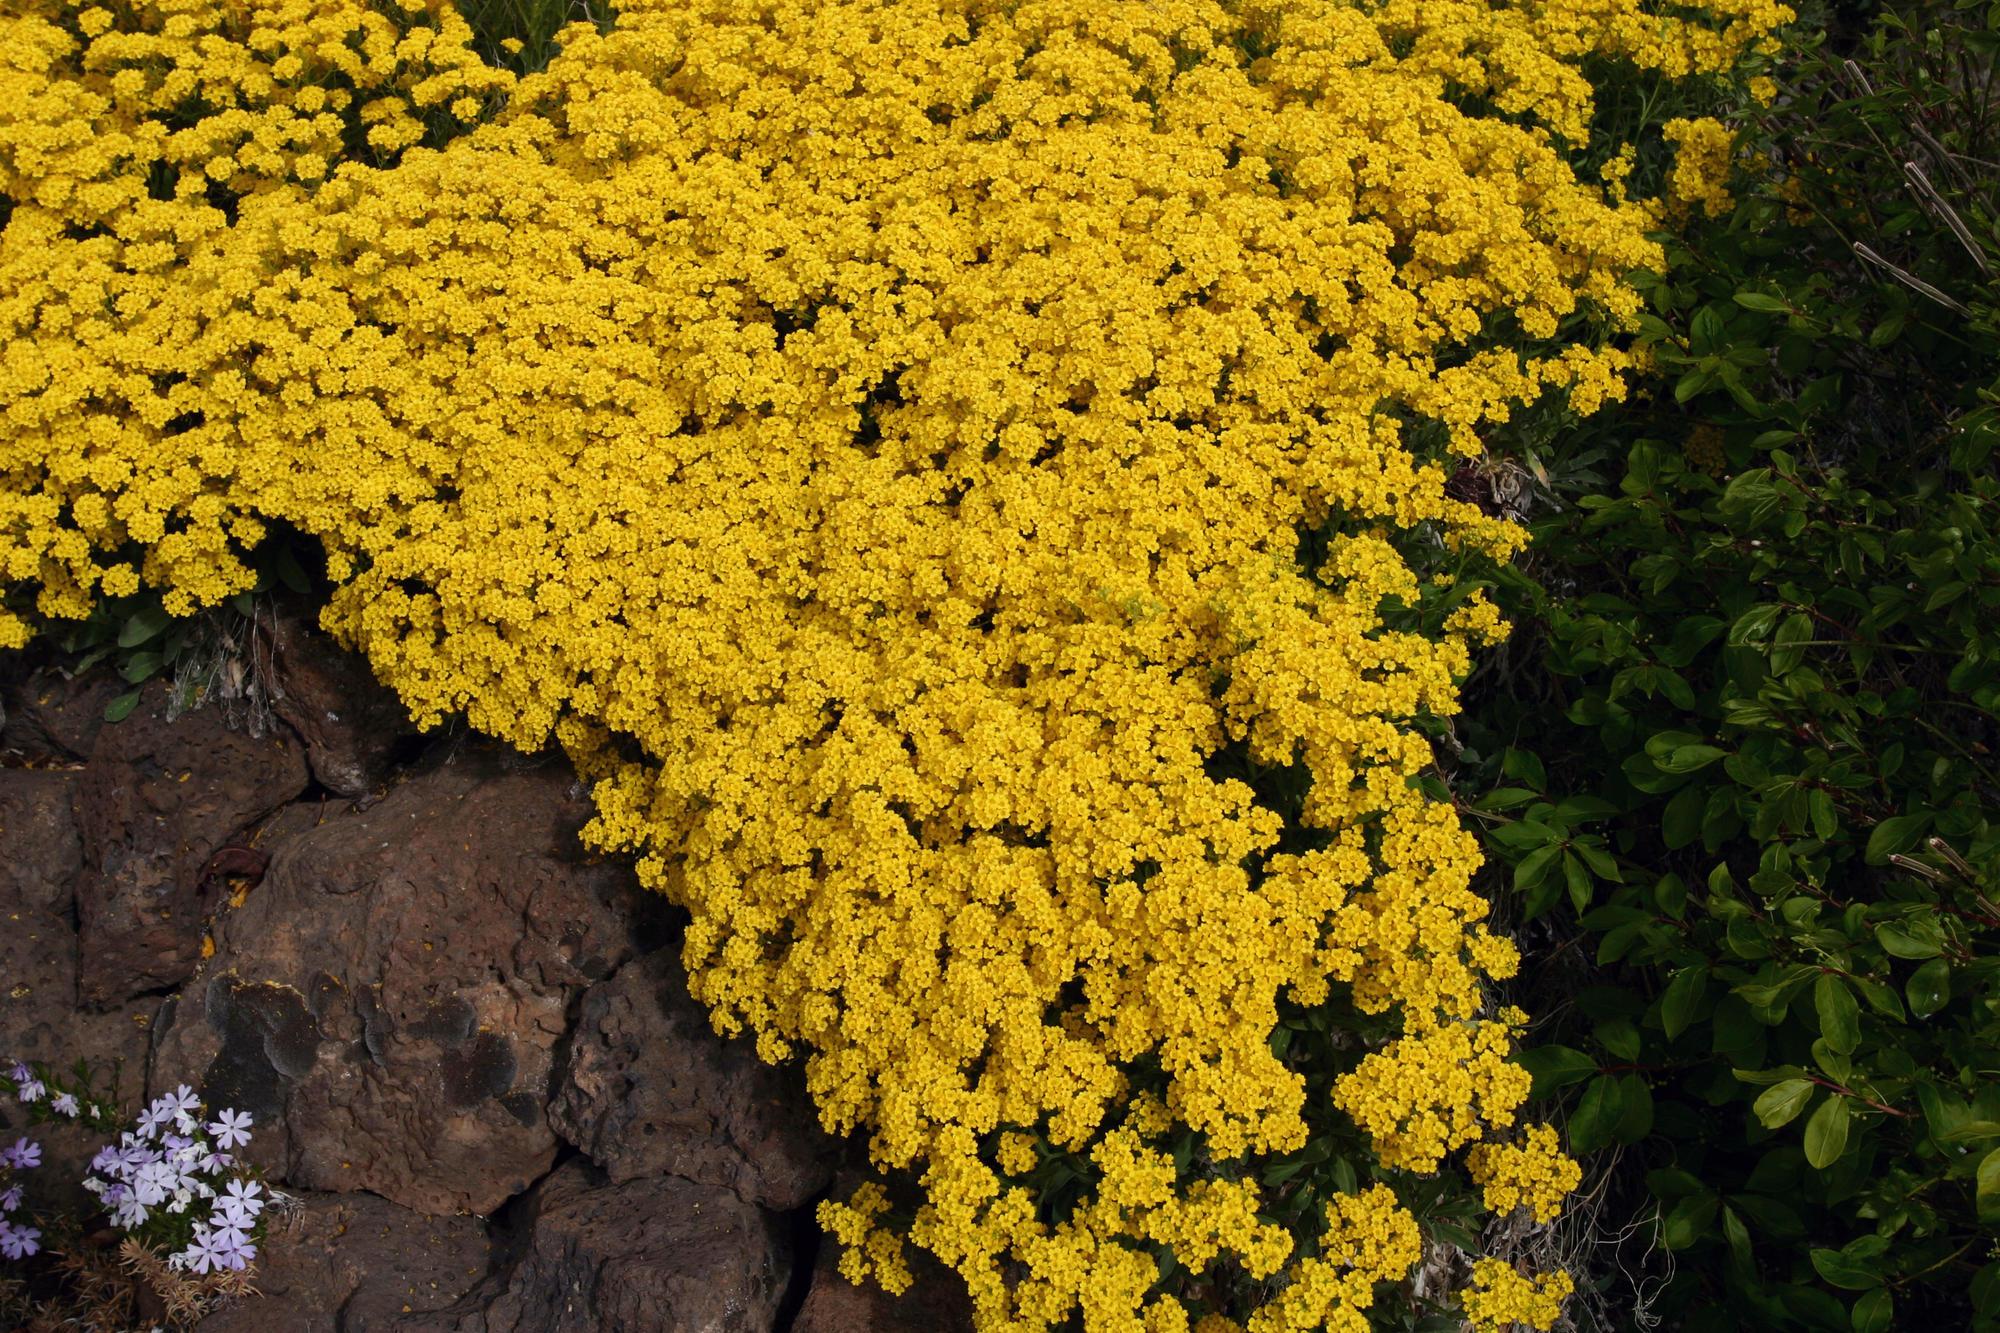 Yellow blooms of a basket of gold plant.